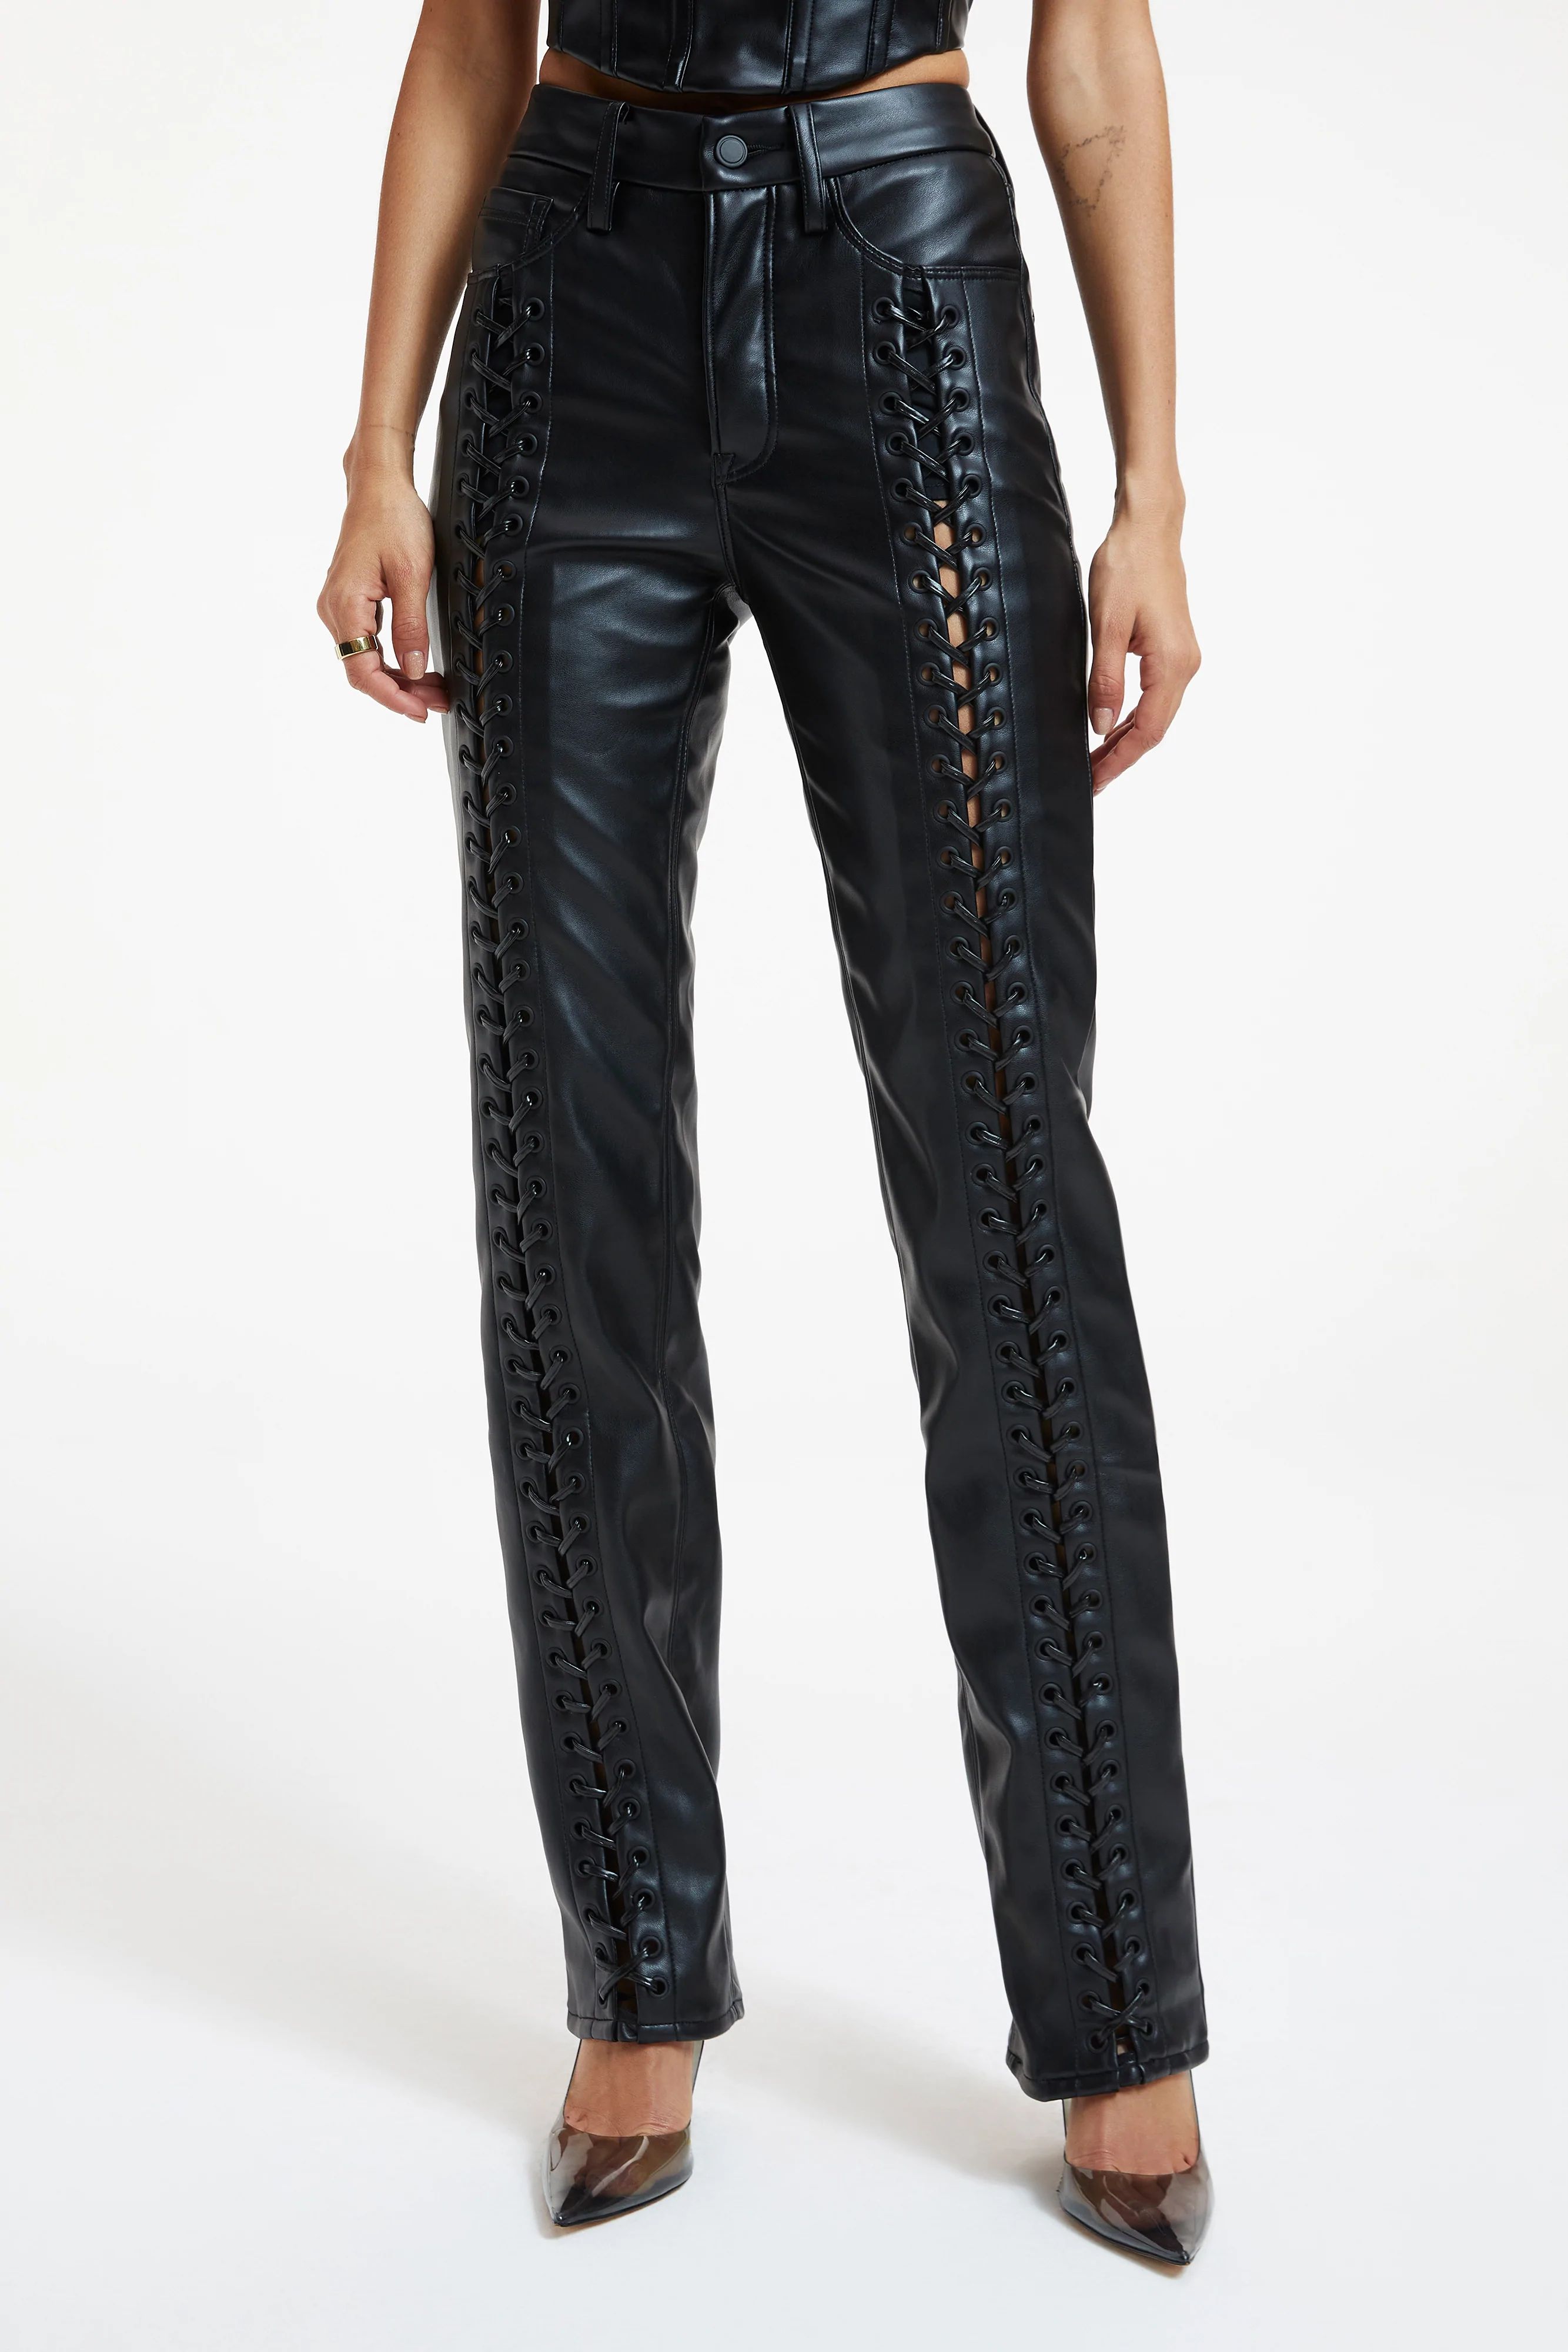 GOOD ICON FAUX LEATHER LACE UP PANTS | BLACK001 | Good American